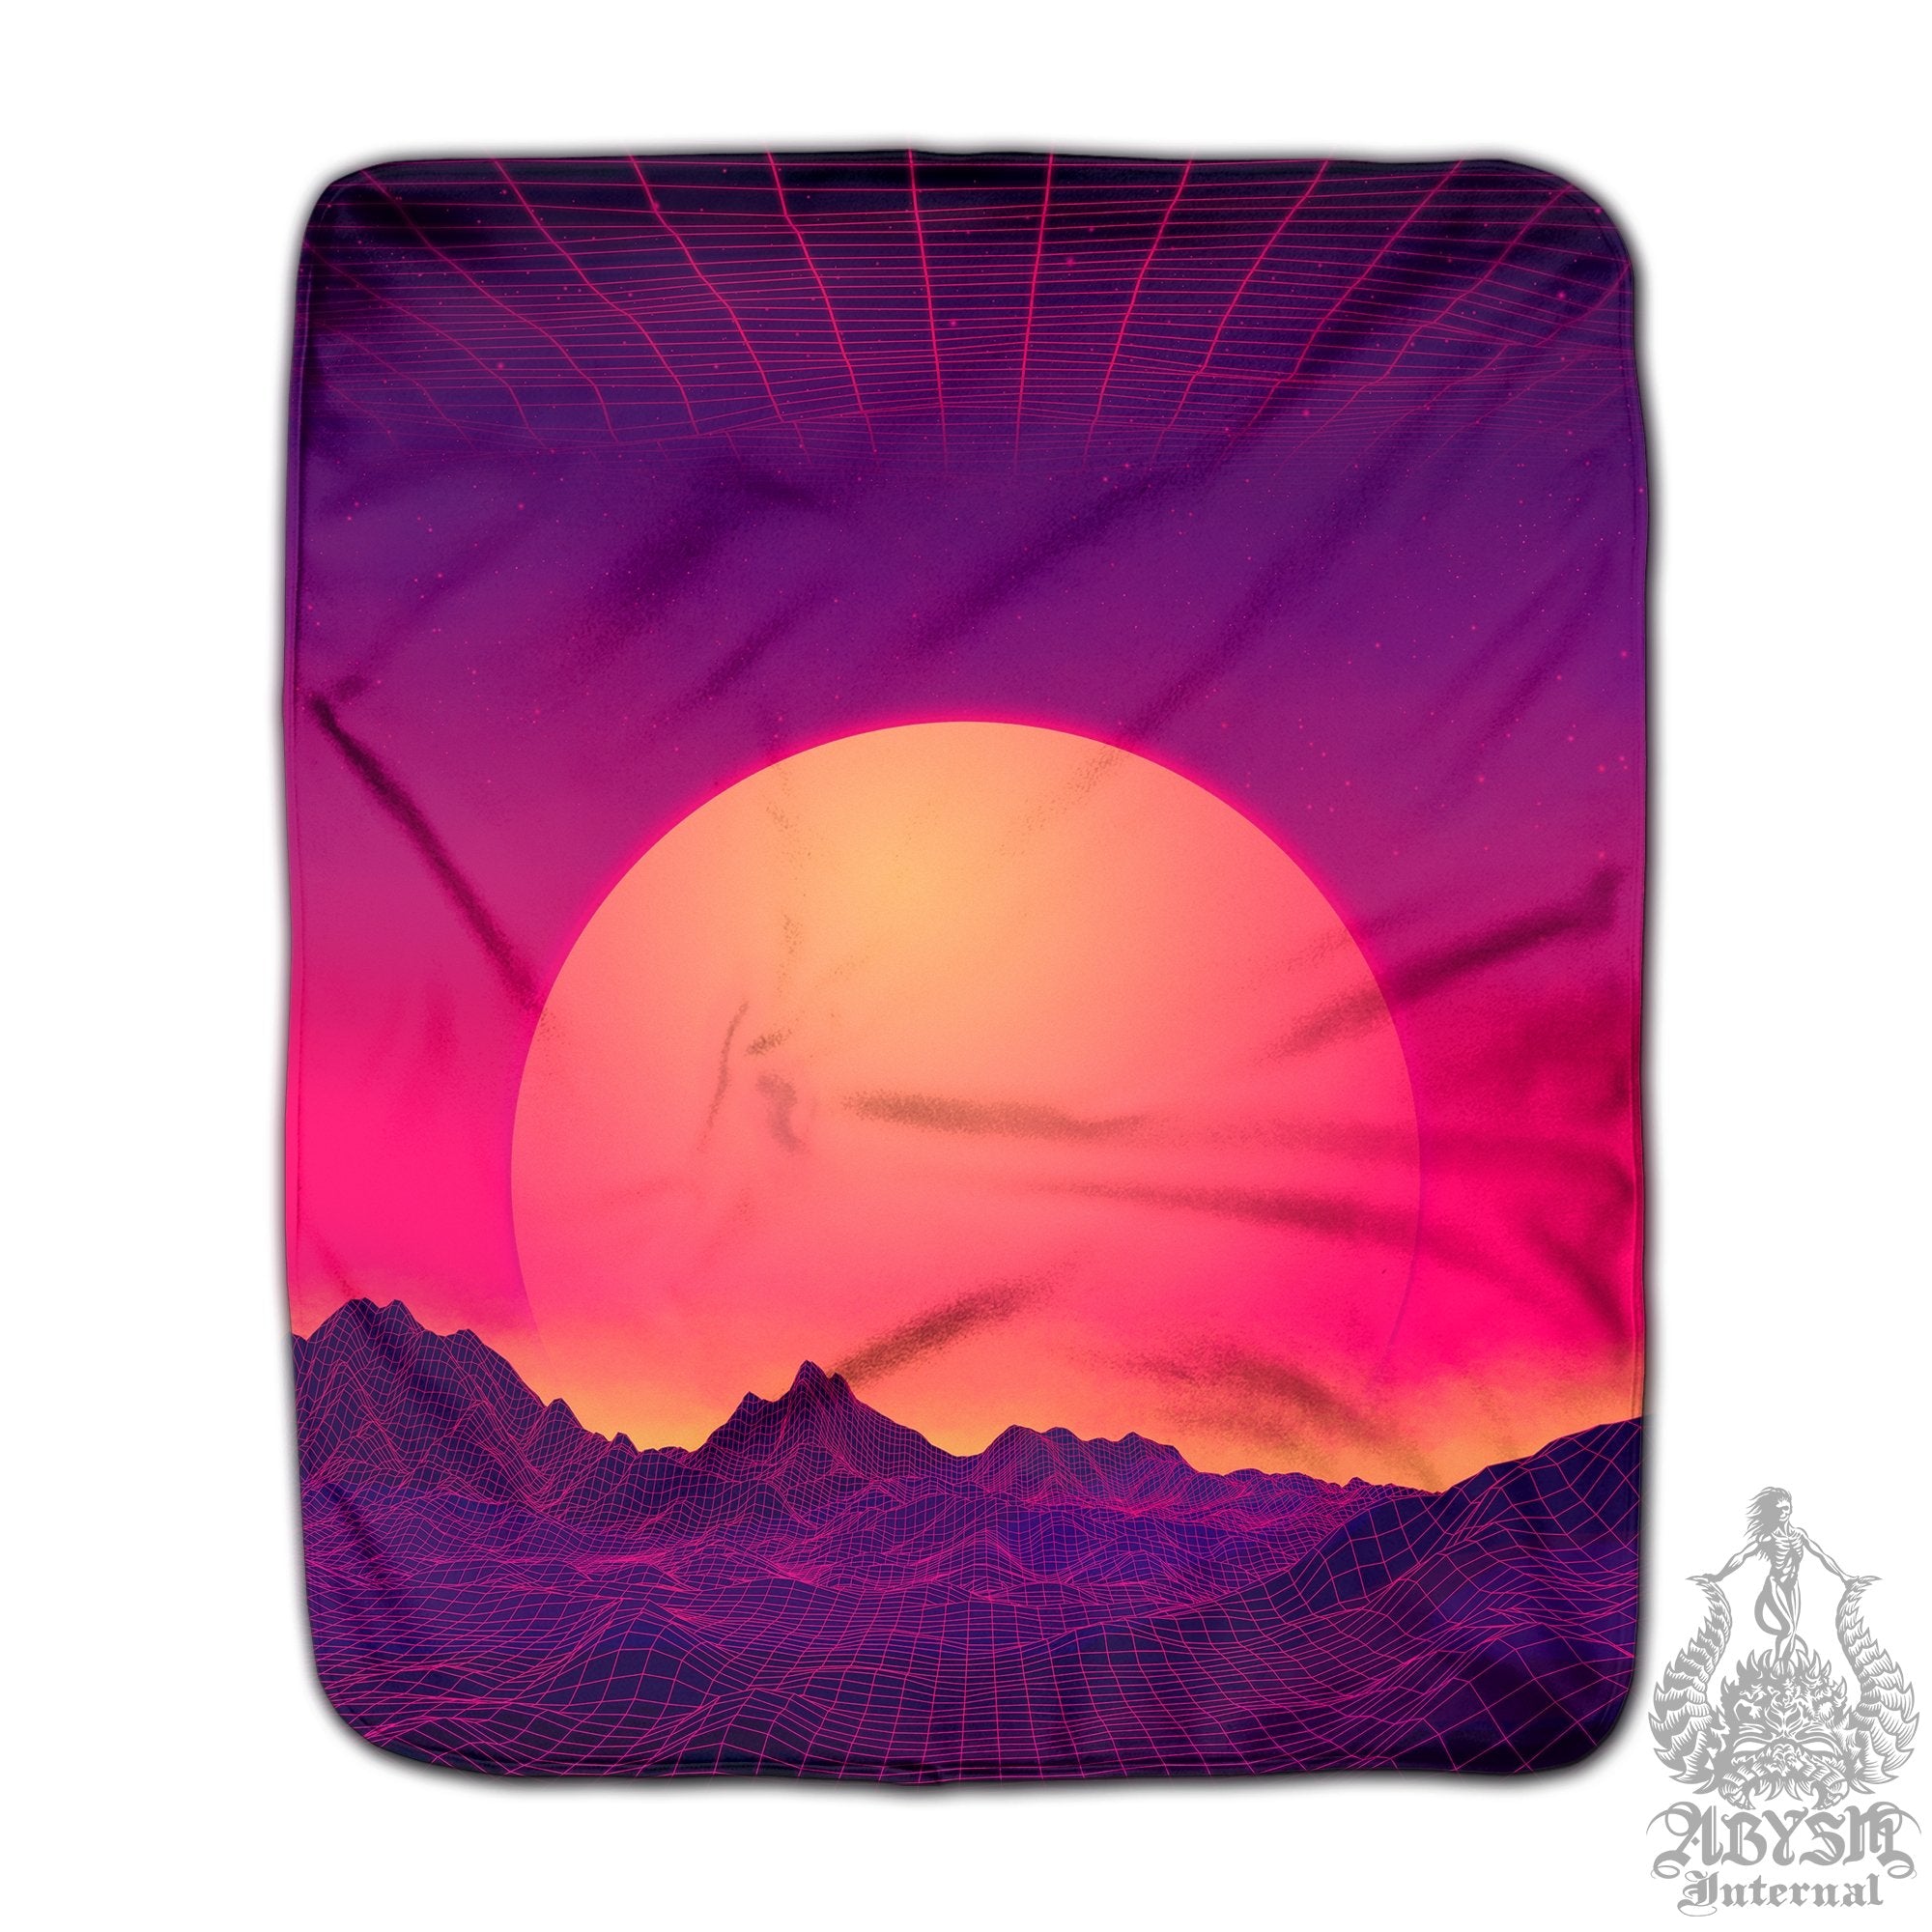 Vaporwave Throw Fleece Blanket, Retrowave Art, Psychedelic Home Decor, 80s Synthwave, Eclectic and Funky Gift for Kids - Sunset - Abysm Internal